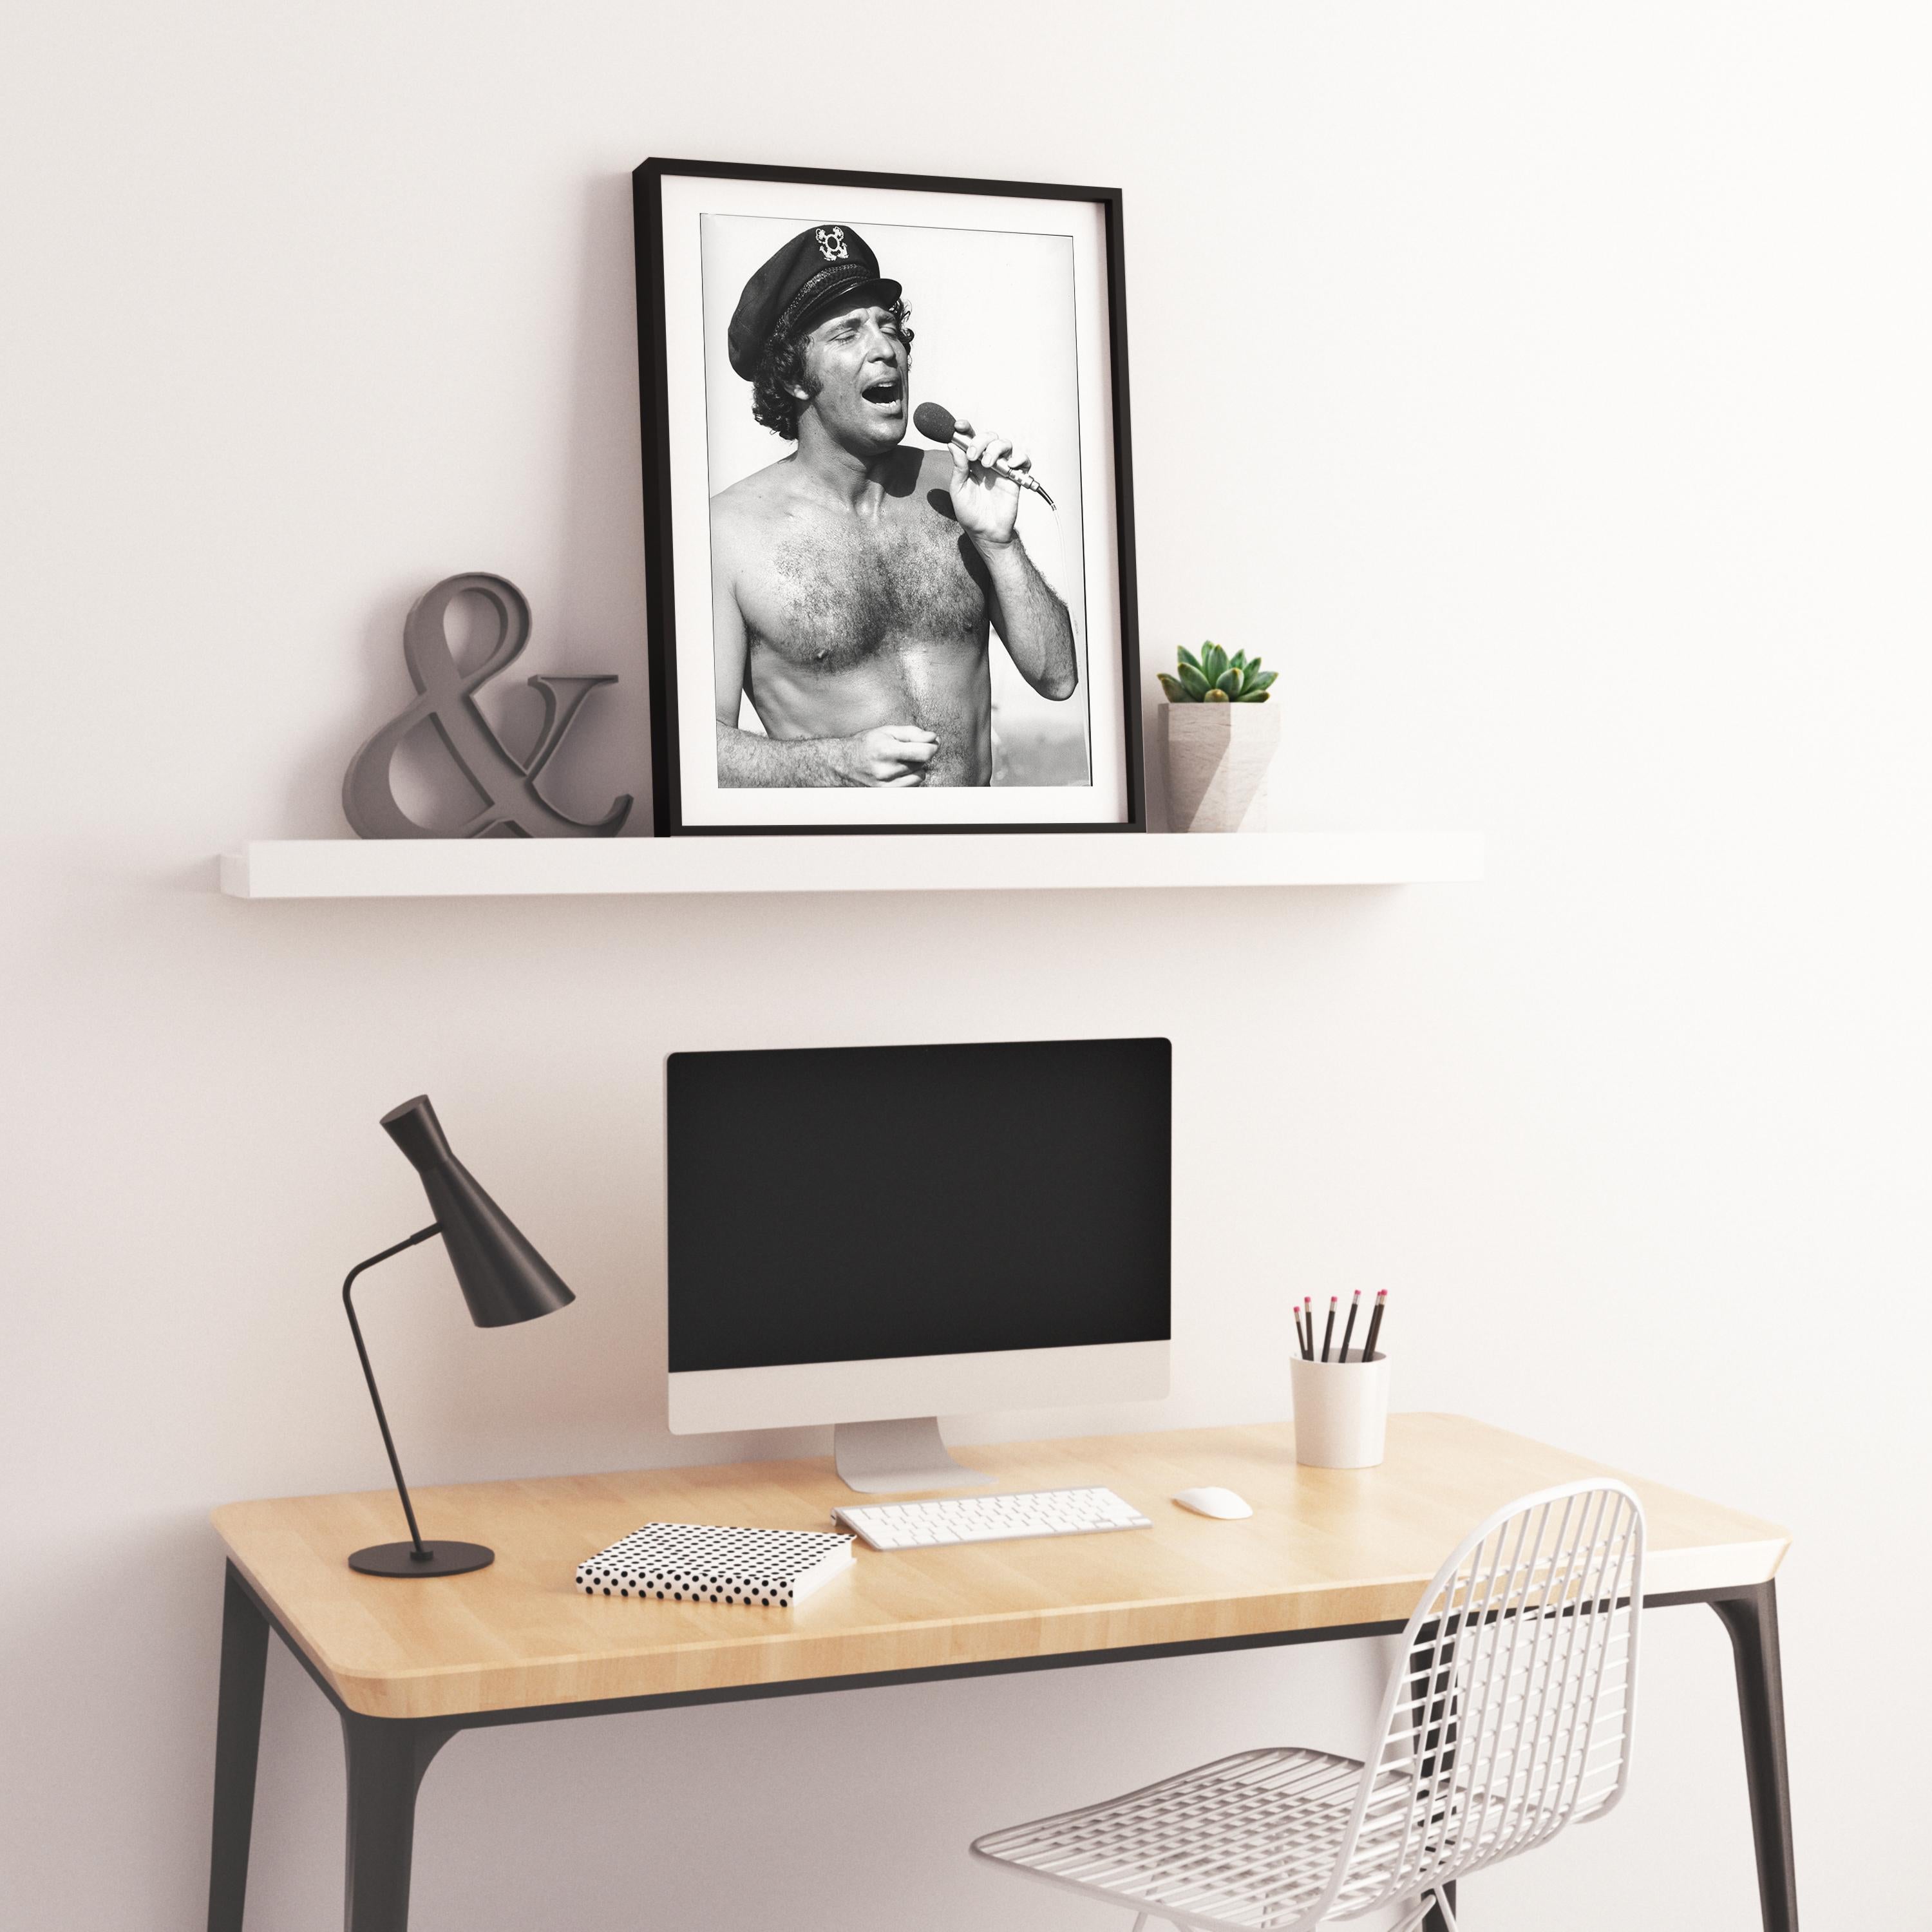 Tom Jones Singing Shirtless Fine Art Print - Gray Black and White Photograph by Unknown